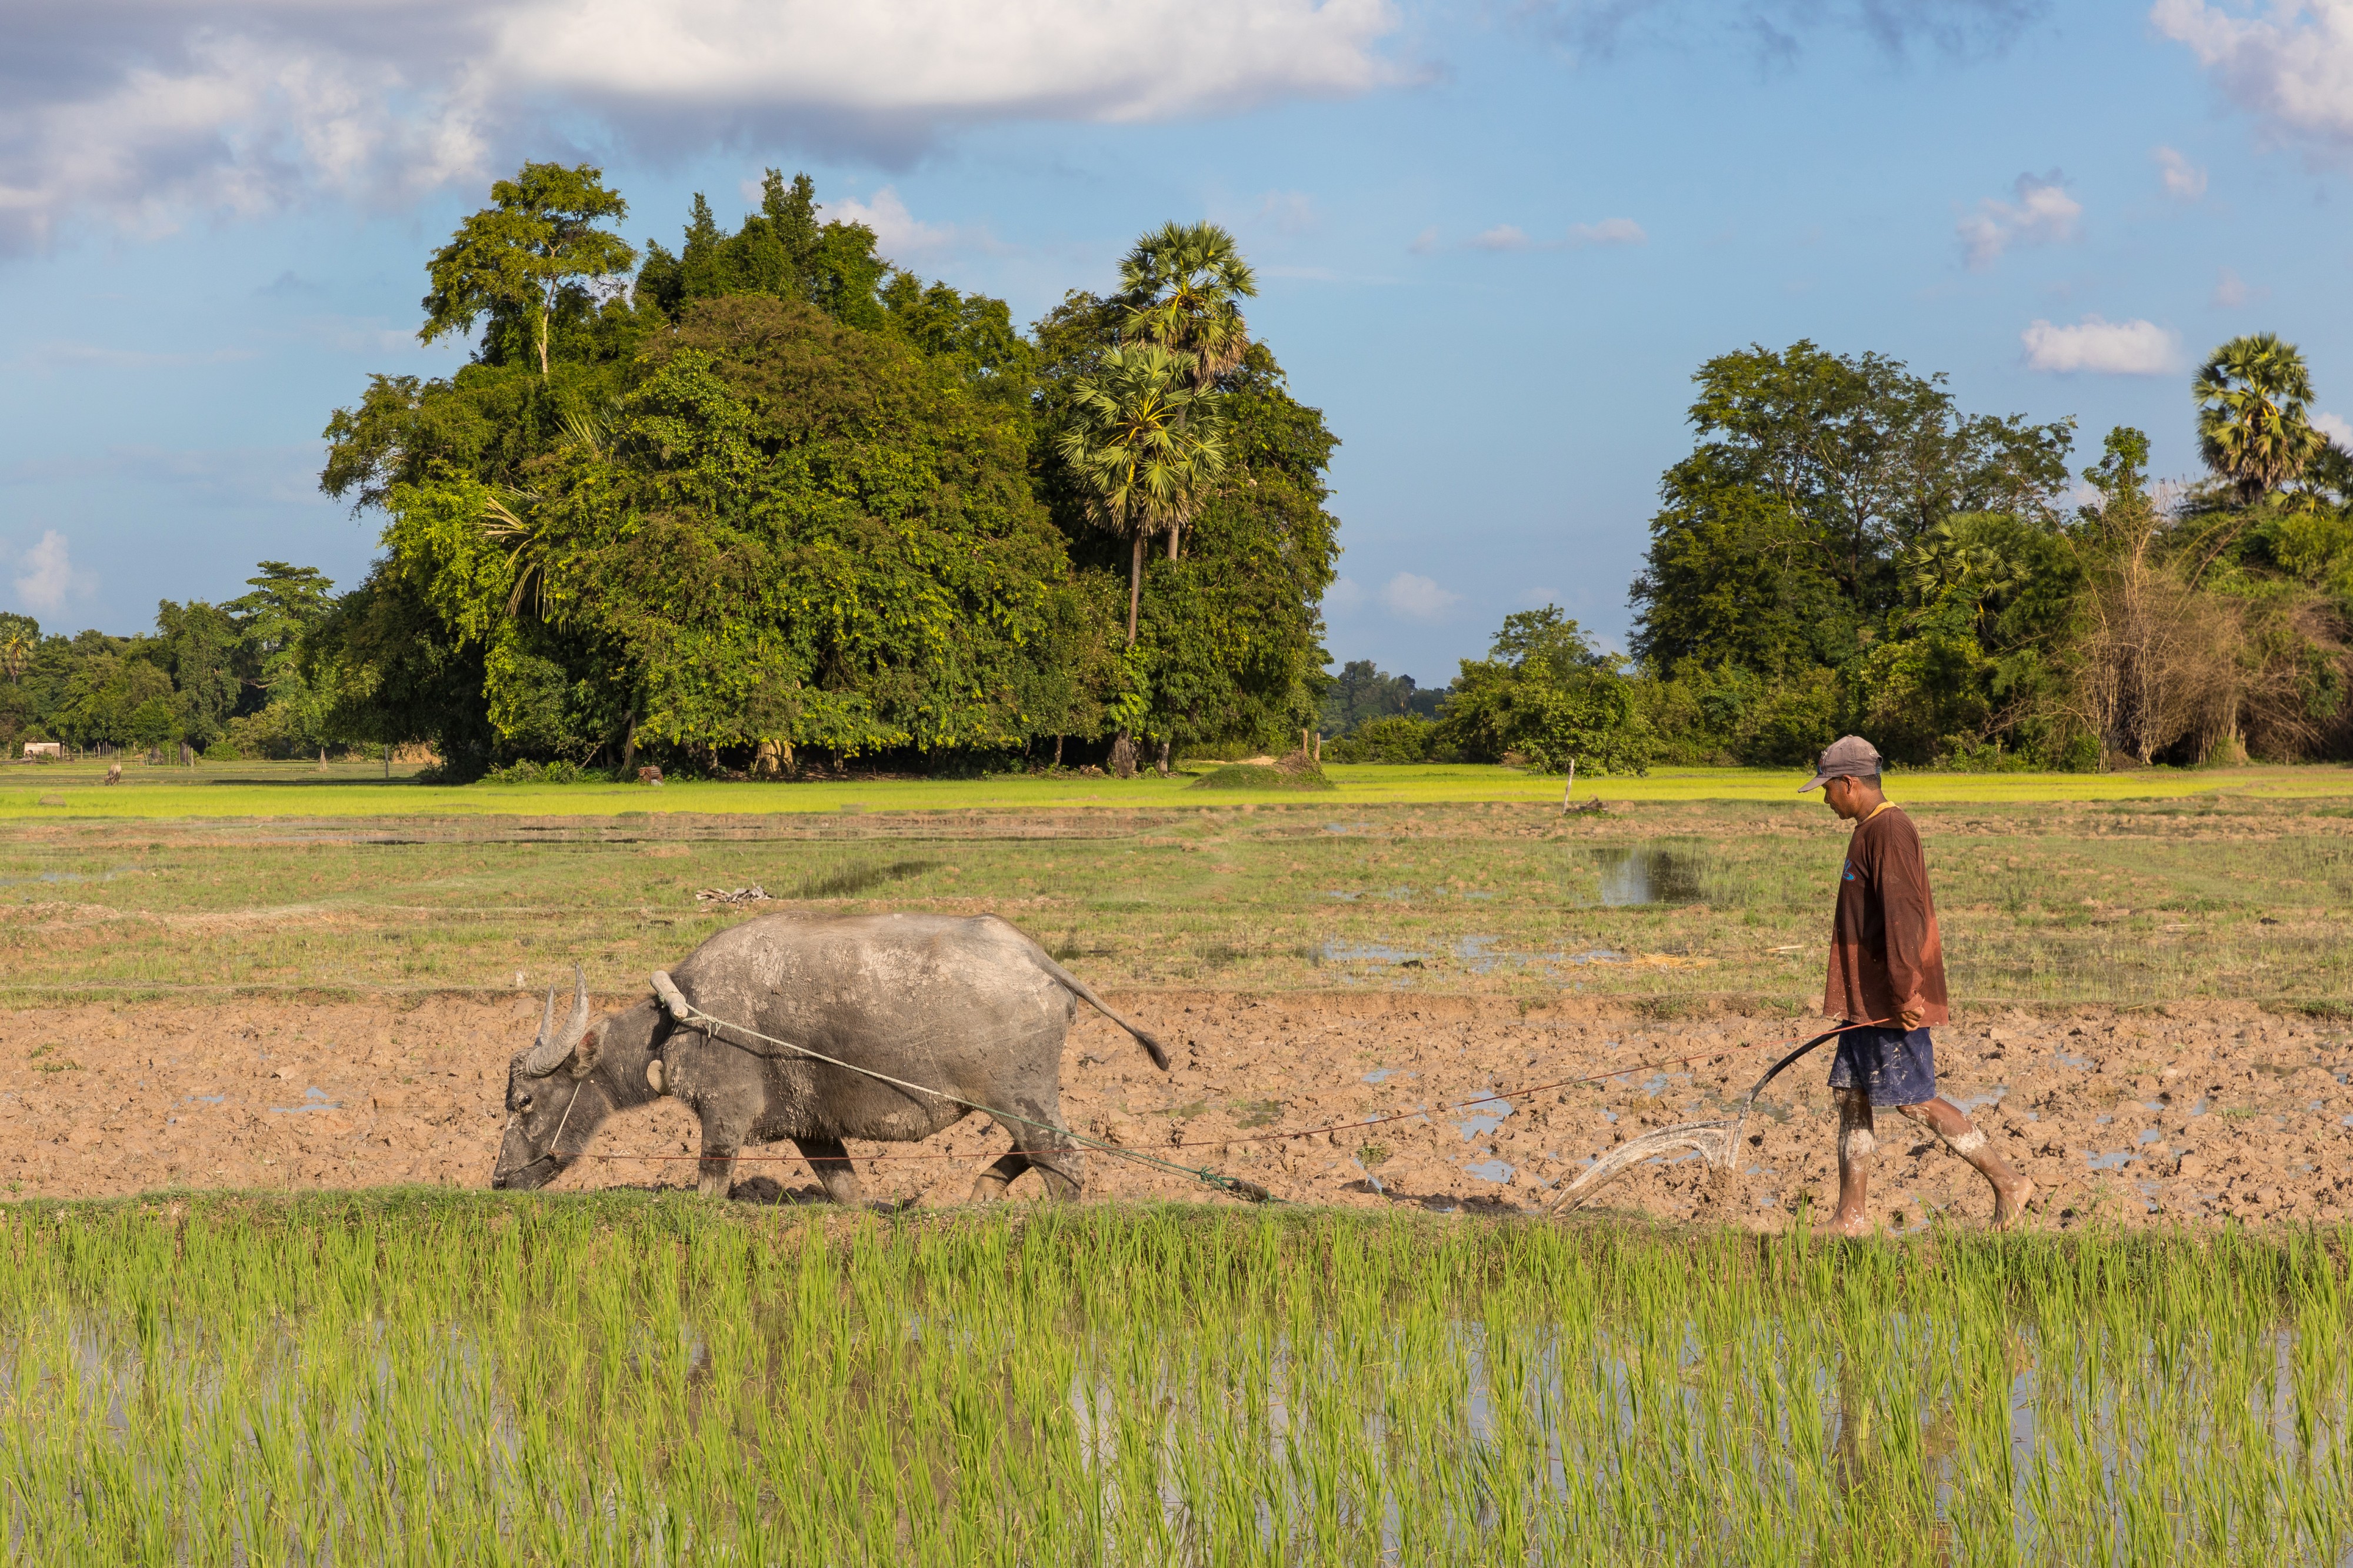 Man in paddy fields plowing with a water buffalo